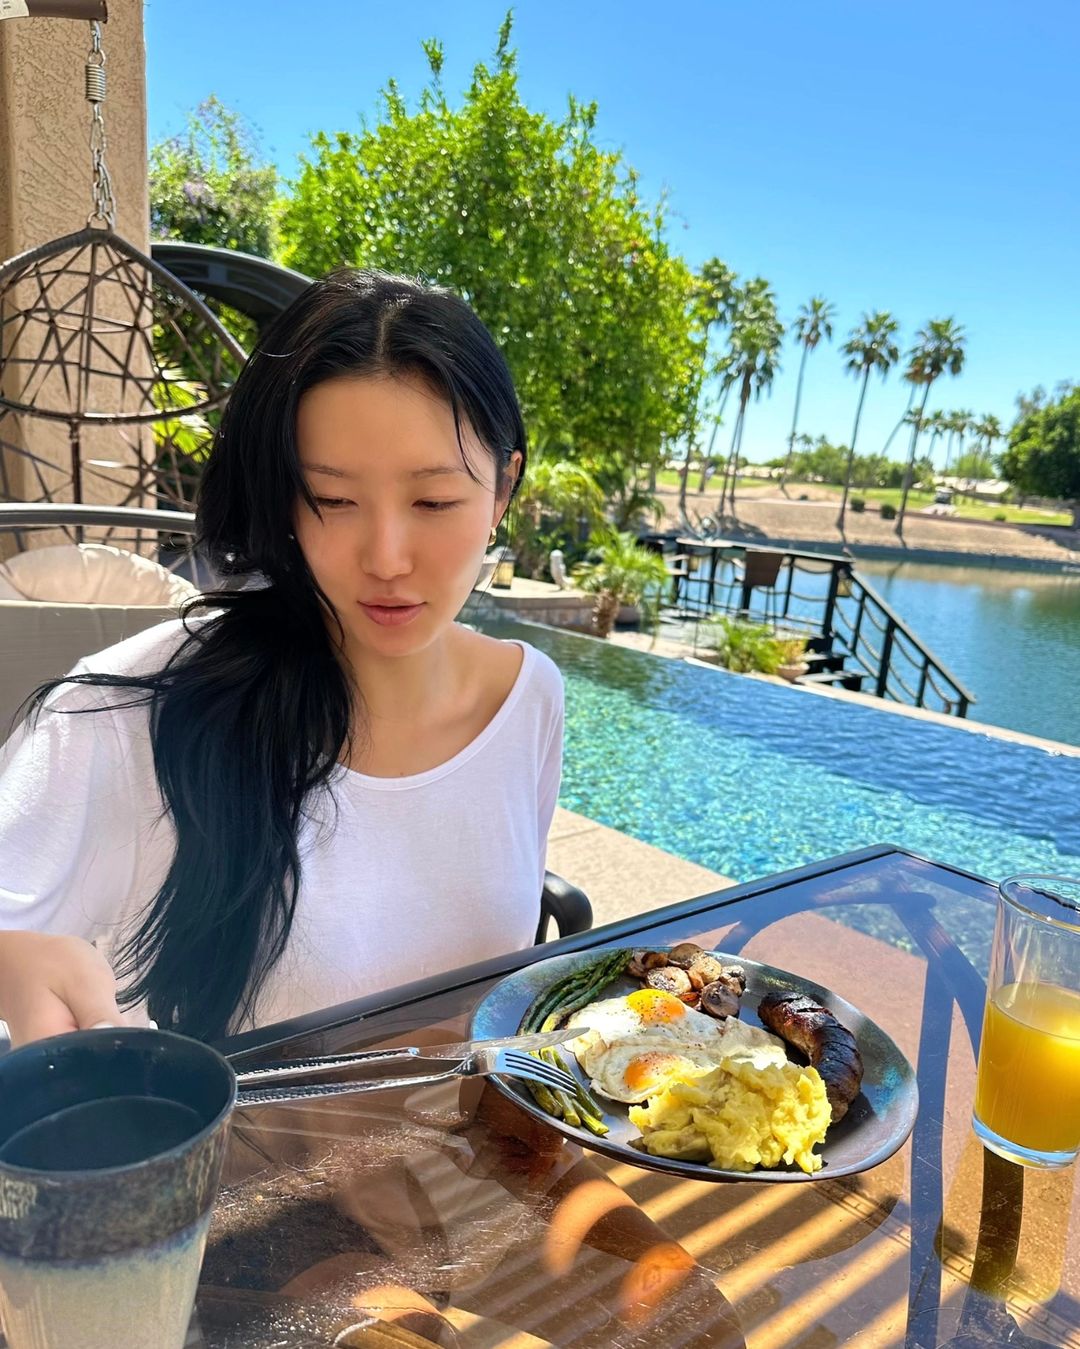 Hwasa, you look like a local American... sexy even without exposure